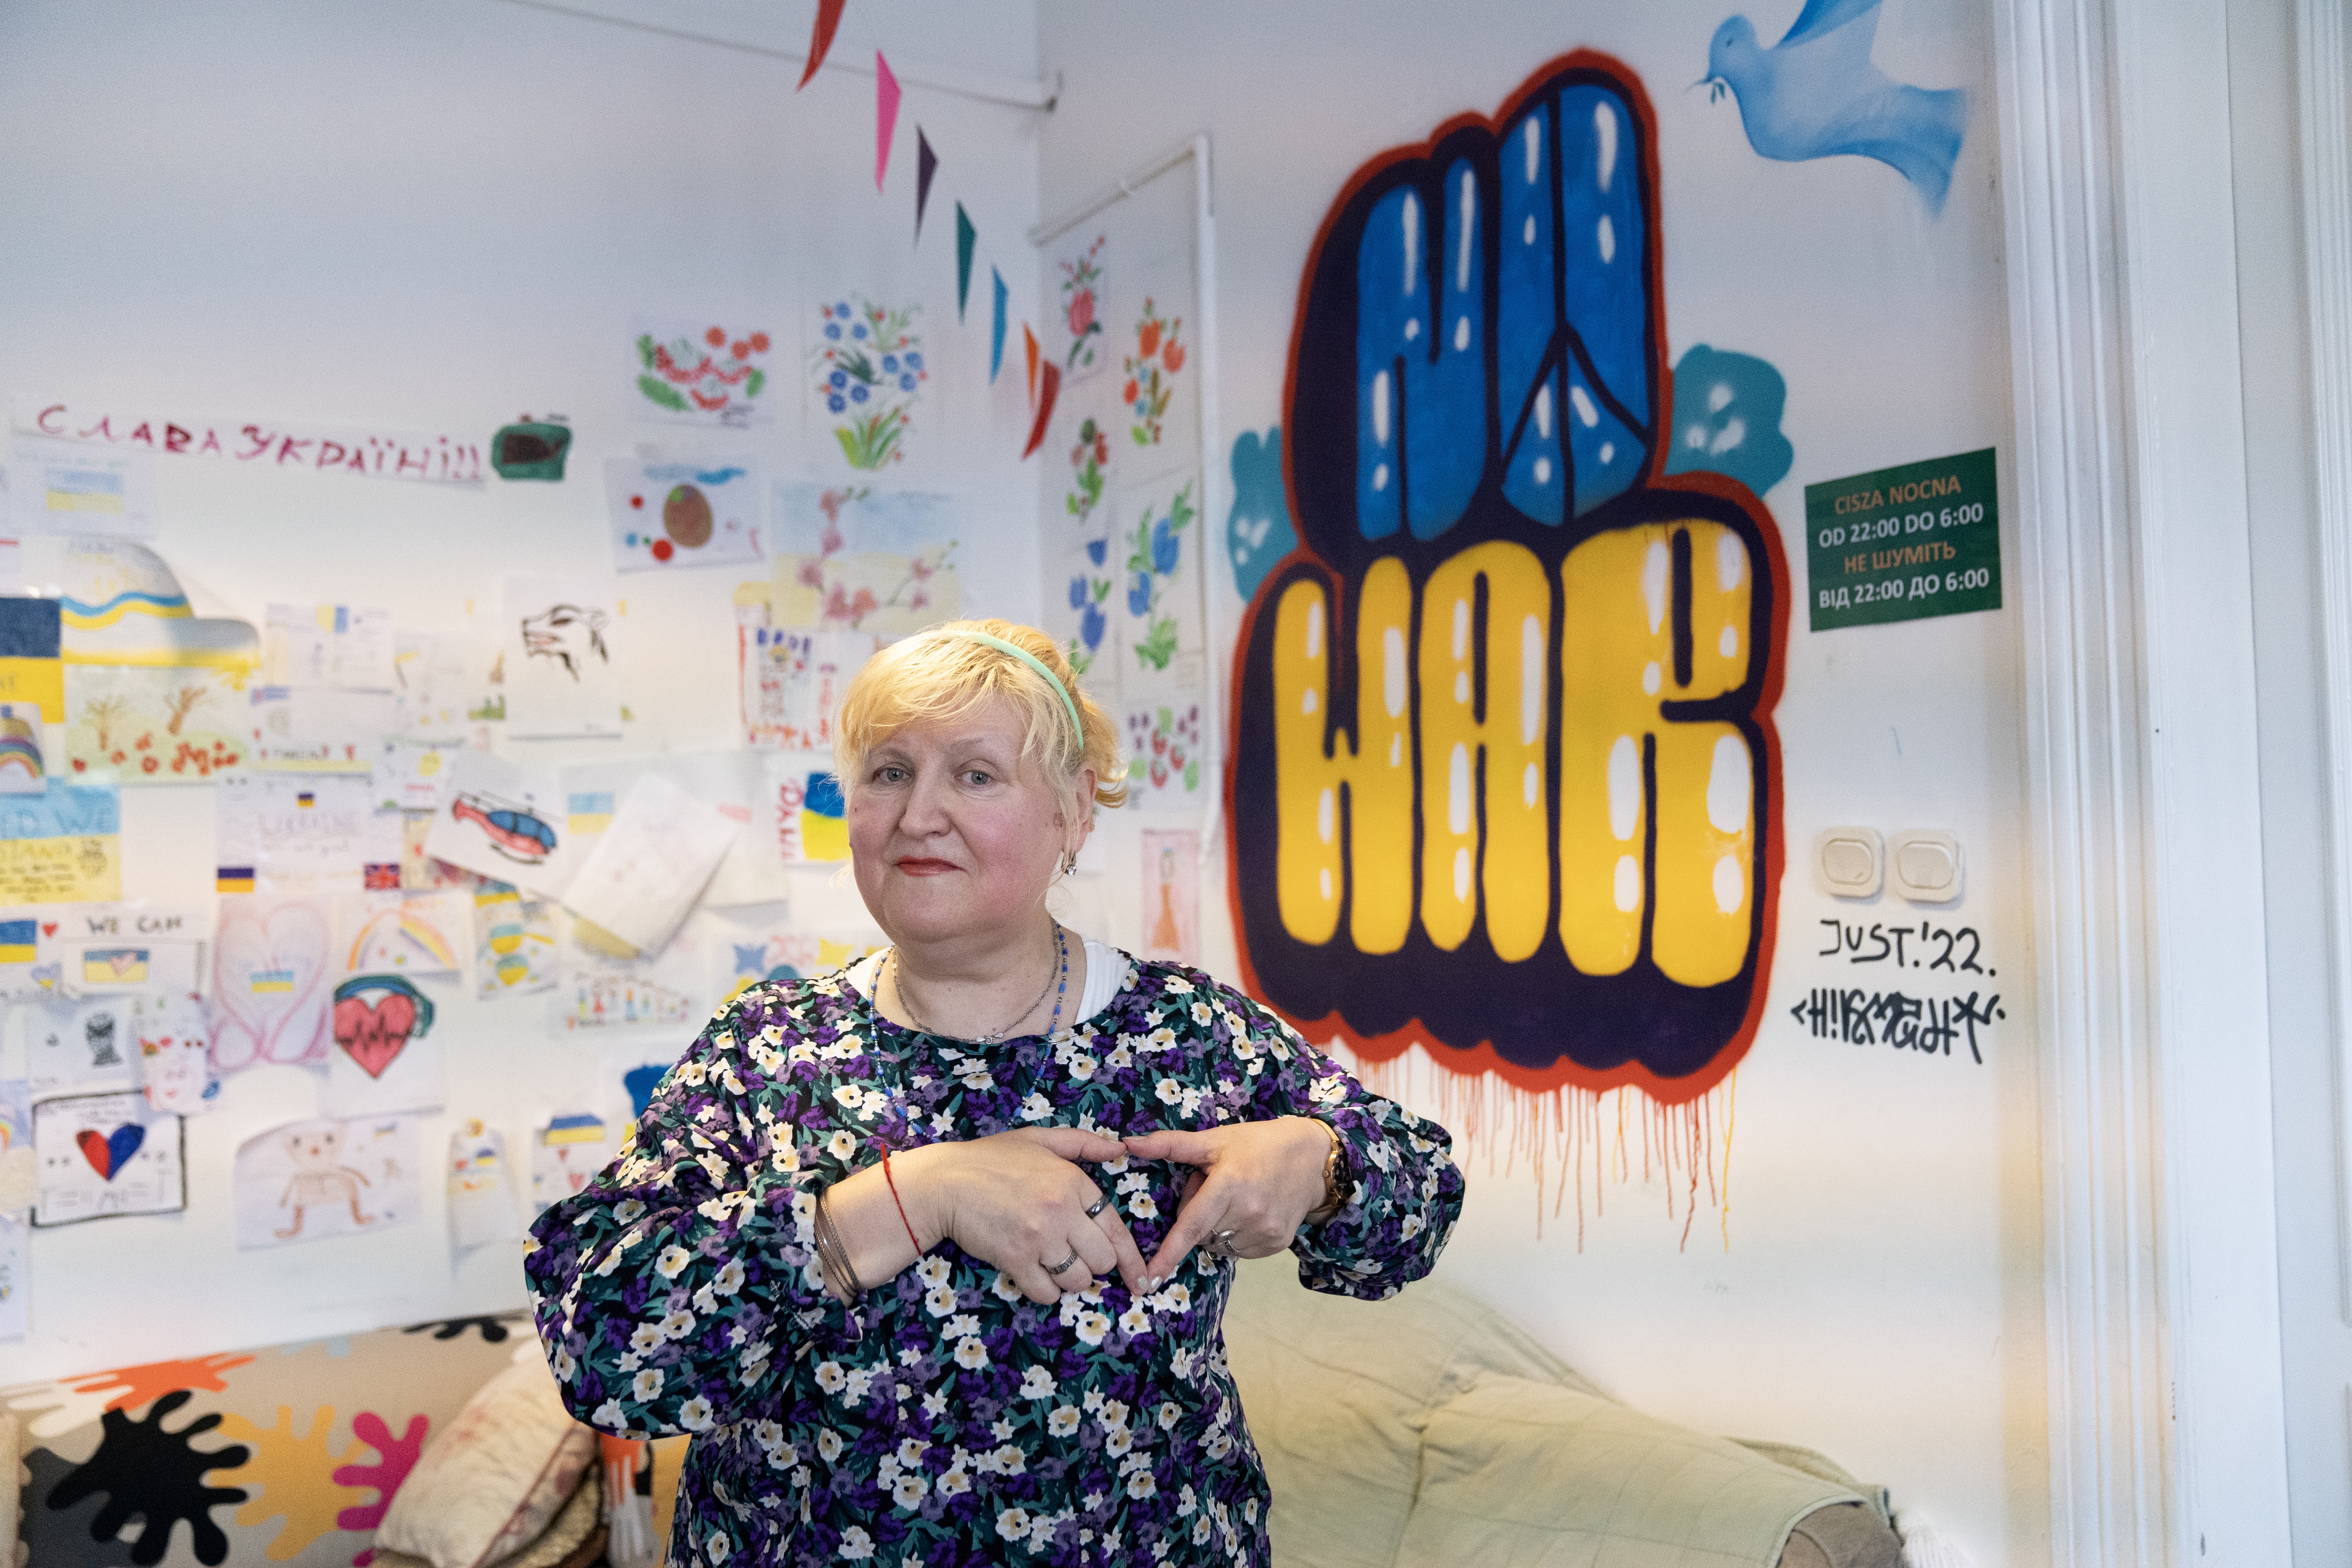 woman makes a heart with her hands in front of a Ukrainian mural that says "No War"